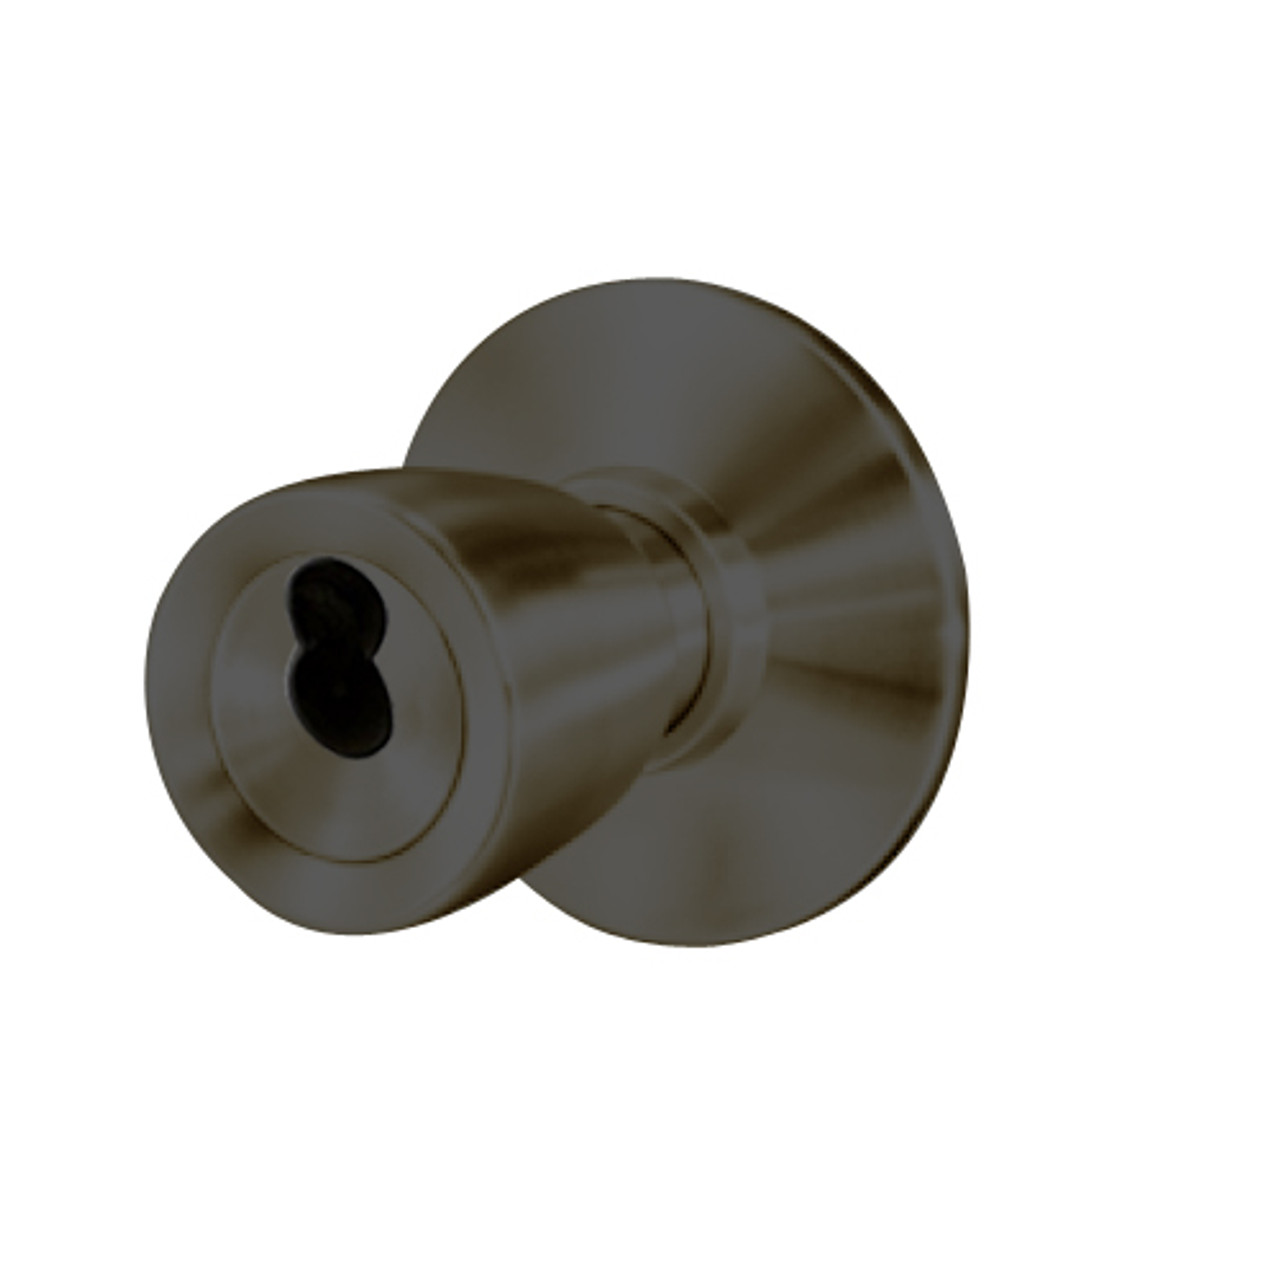 8K37XR6DSTK613 Best 8K Series Special Heavy Duty Cylindrical Knob Locks with Tulip Style in Oil Rubbed Bronze